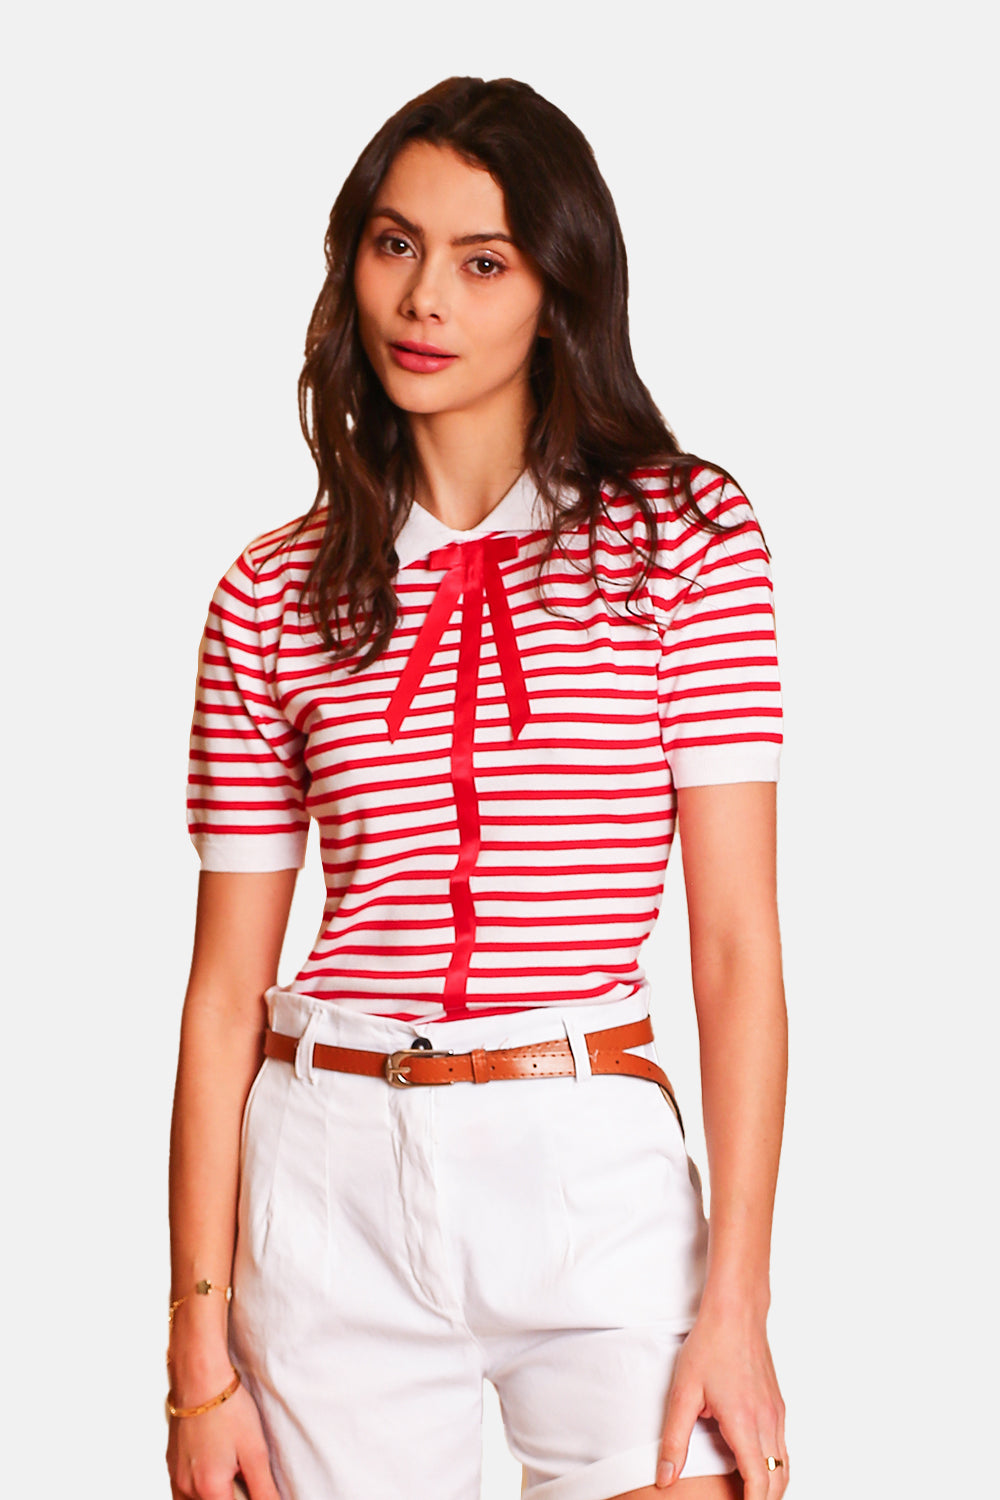 Sailor polo neck sweater with bow with long sleeves